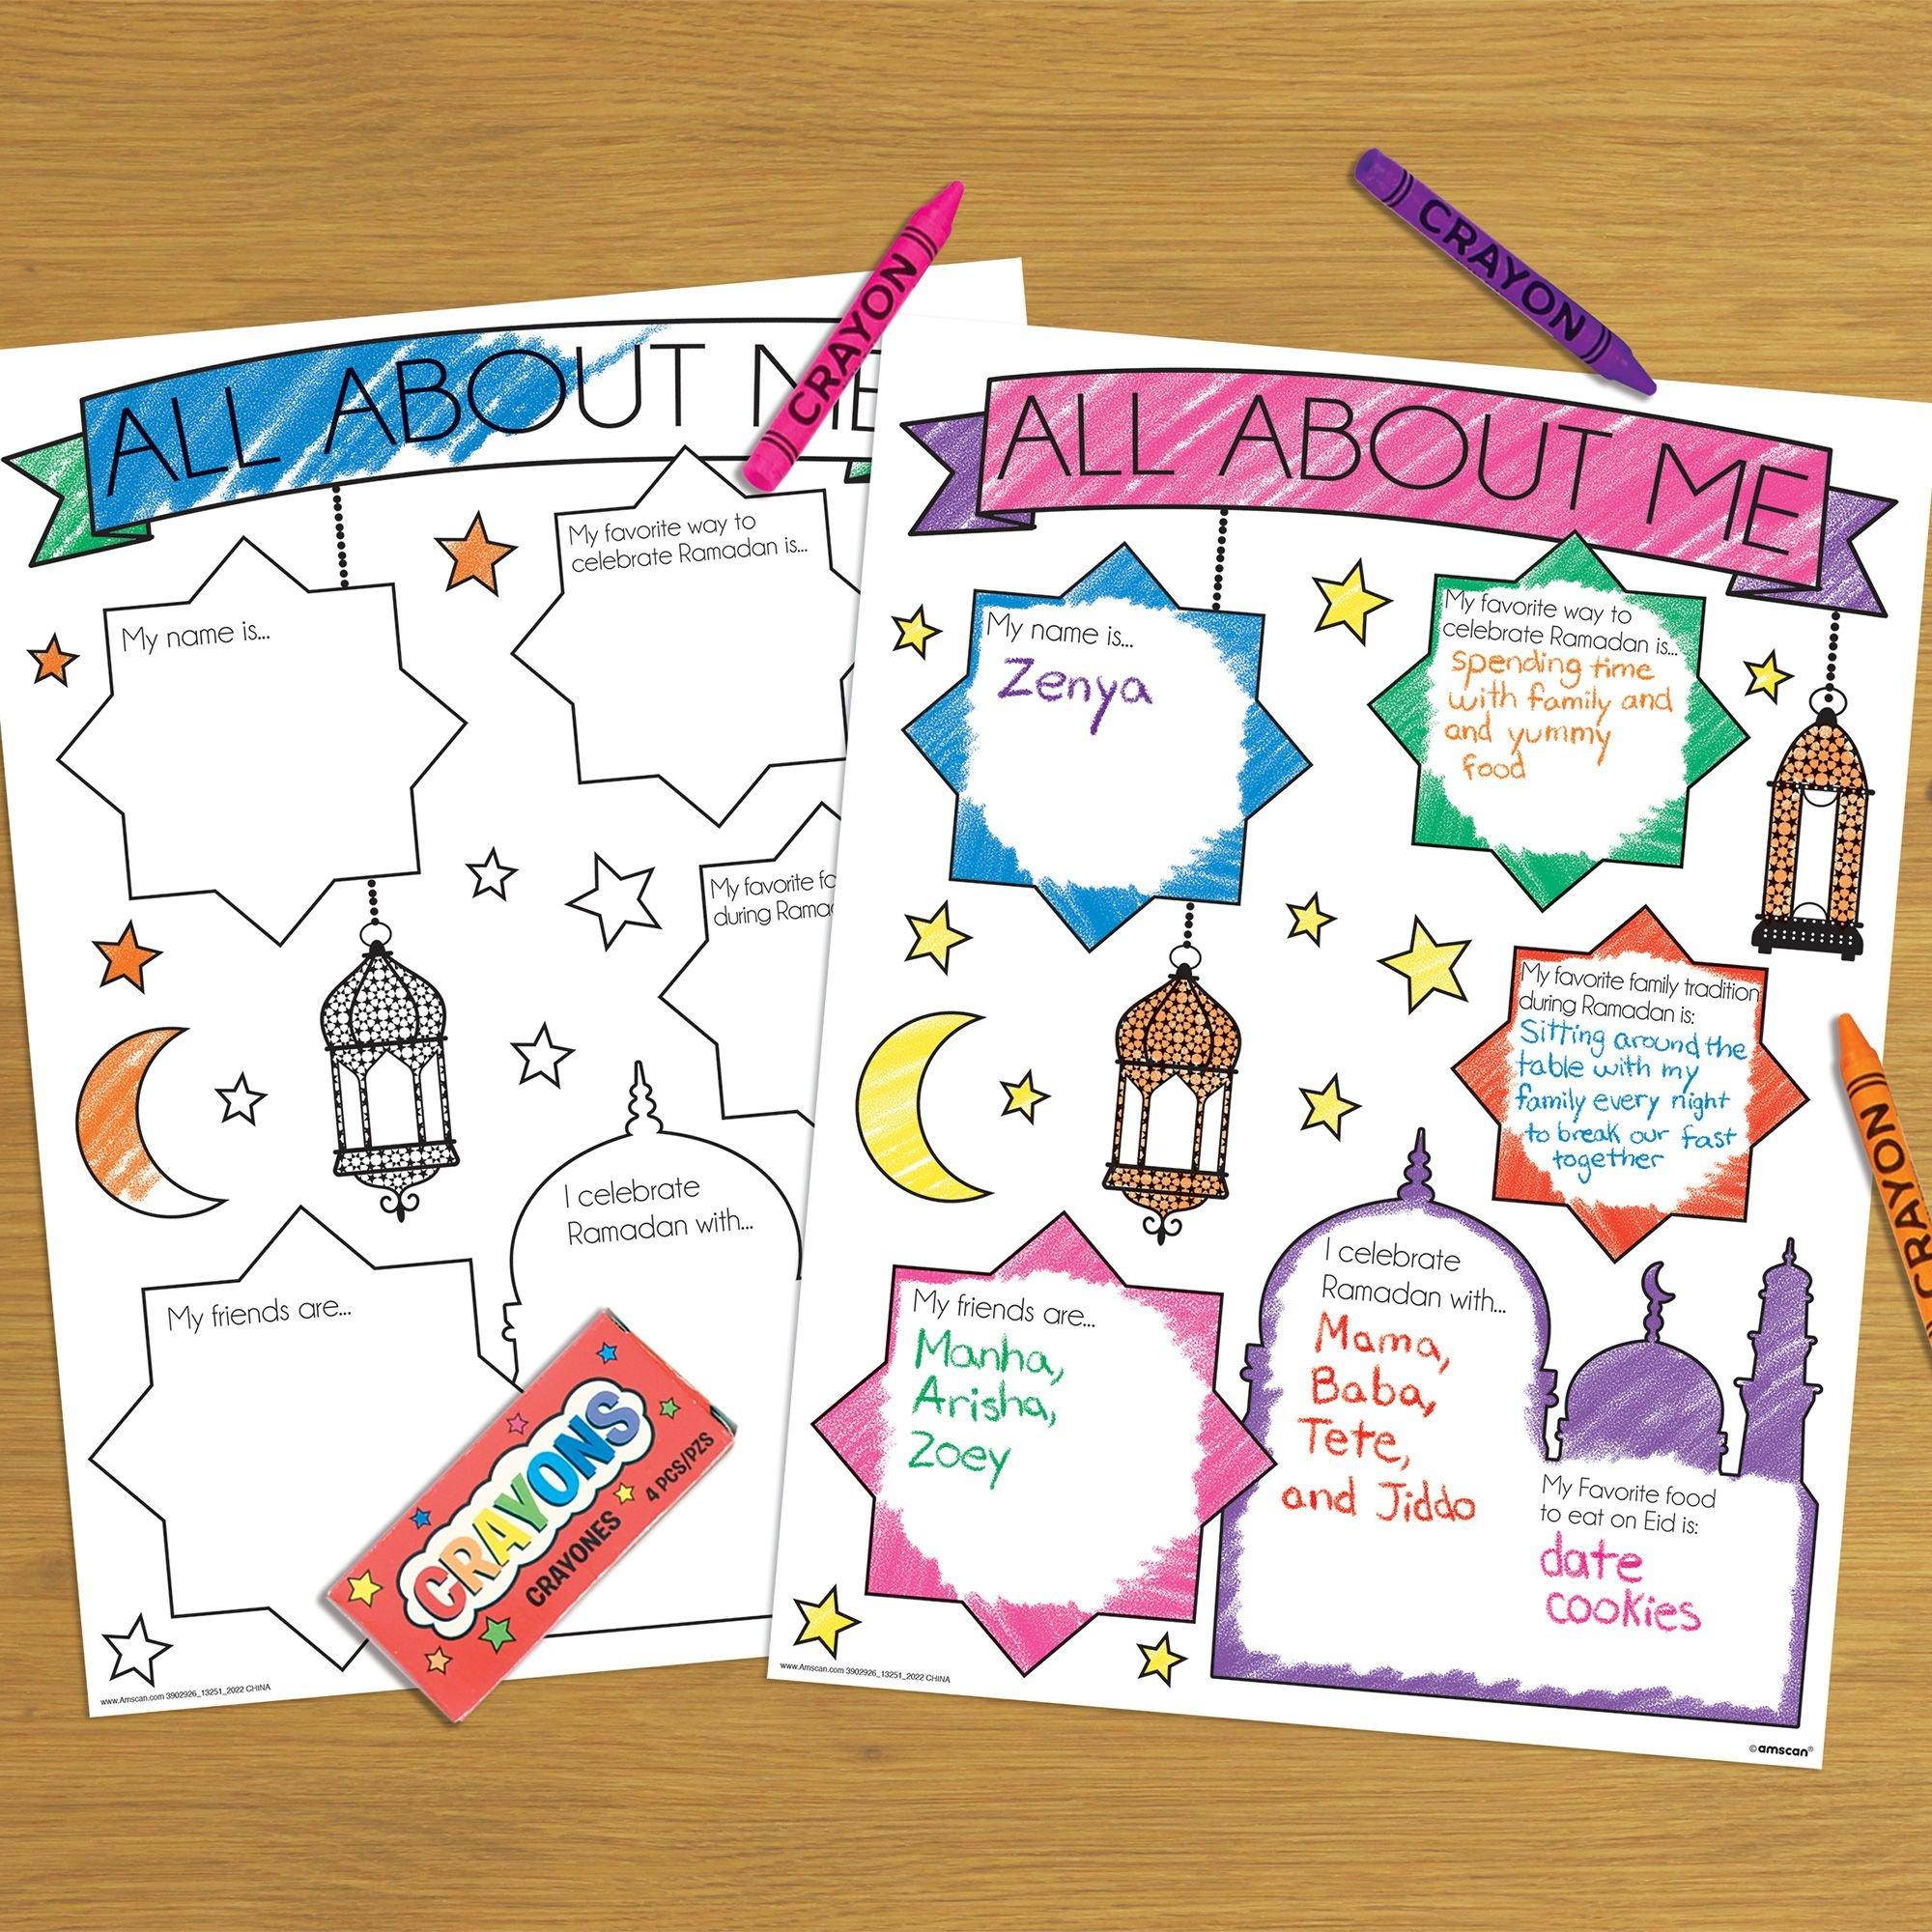 All About Me Ramadan Activity Sheets, 8.5in x 11in, 10ct